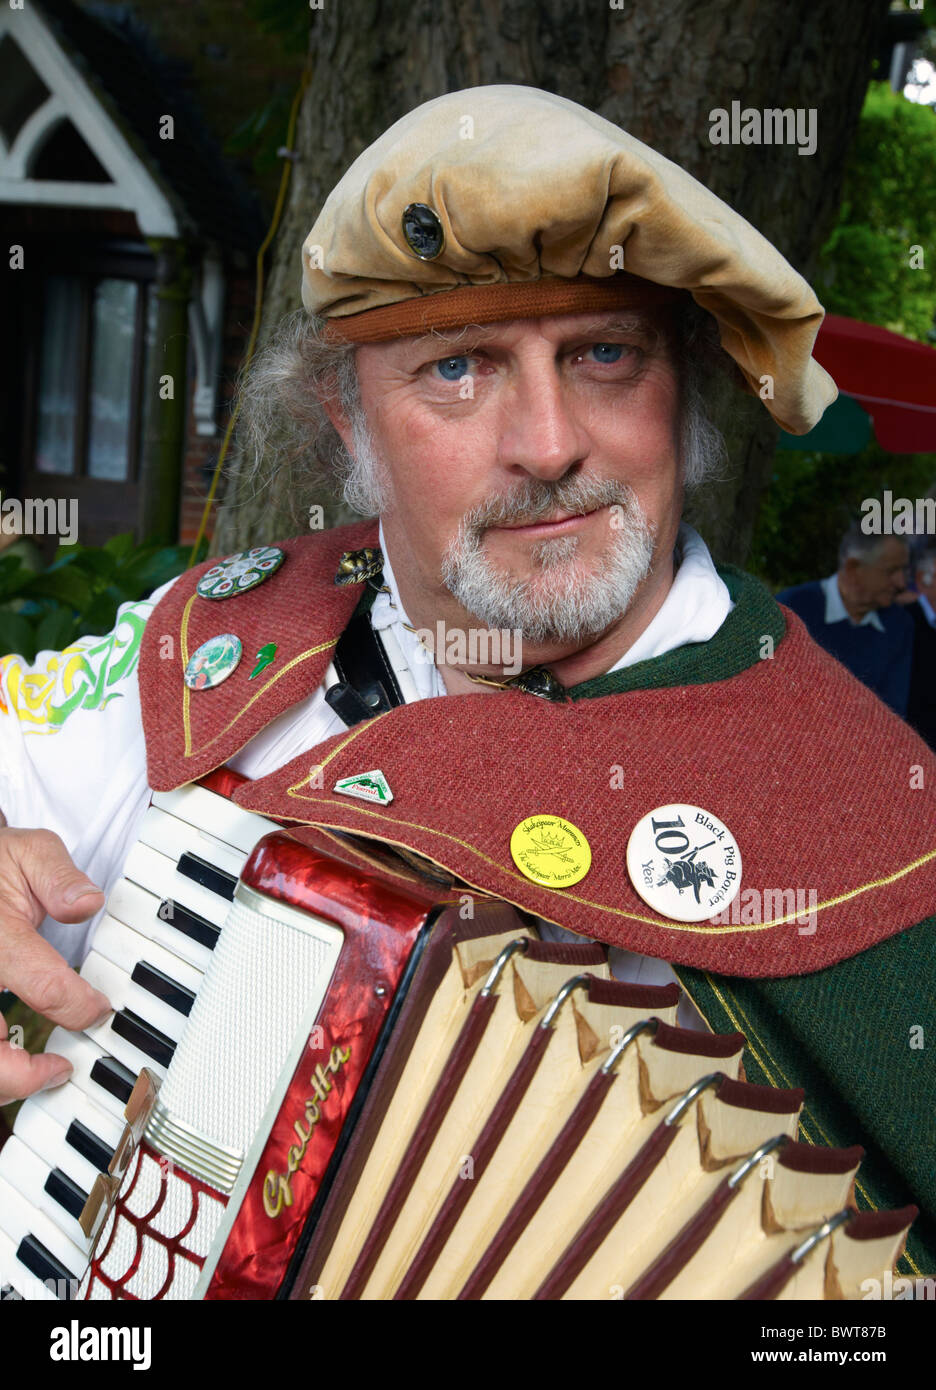 Accordion Player At The Abbots Bromley Horn Dance Staffordshire UK Europe Stock Photo